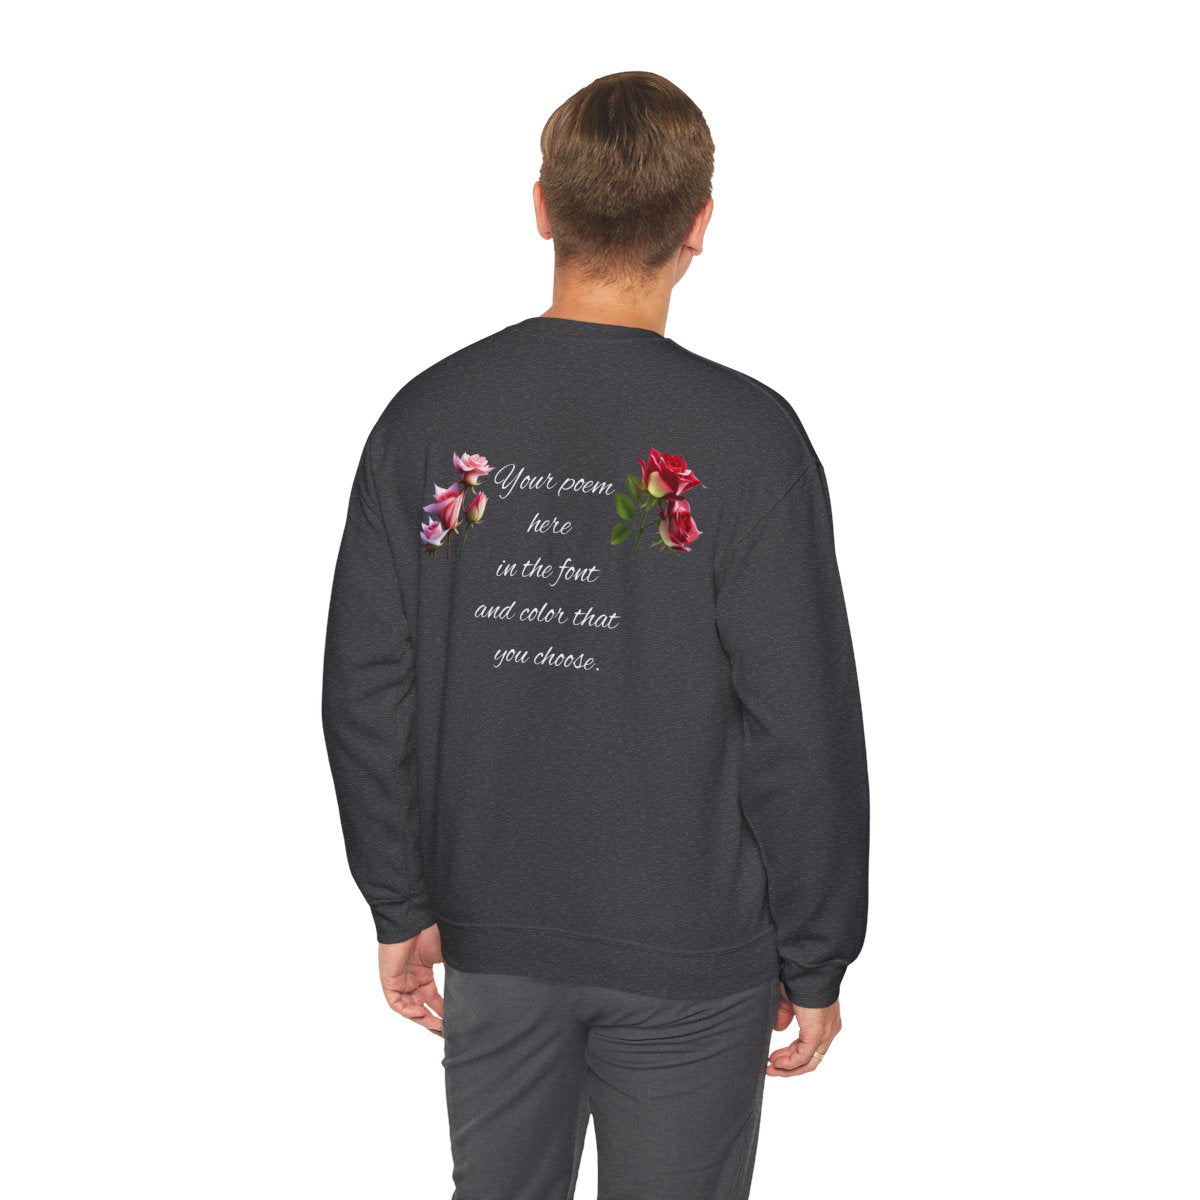 Your Poem On A Sweatshirt With A Rose